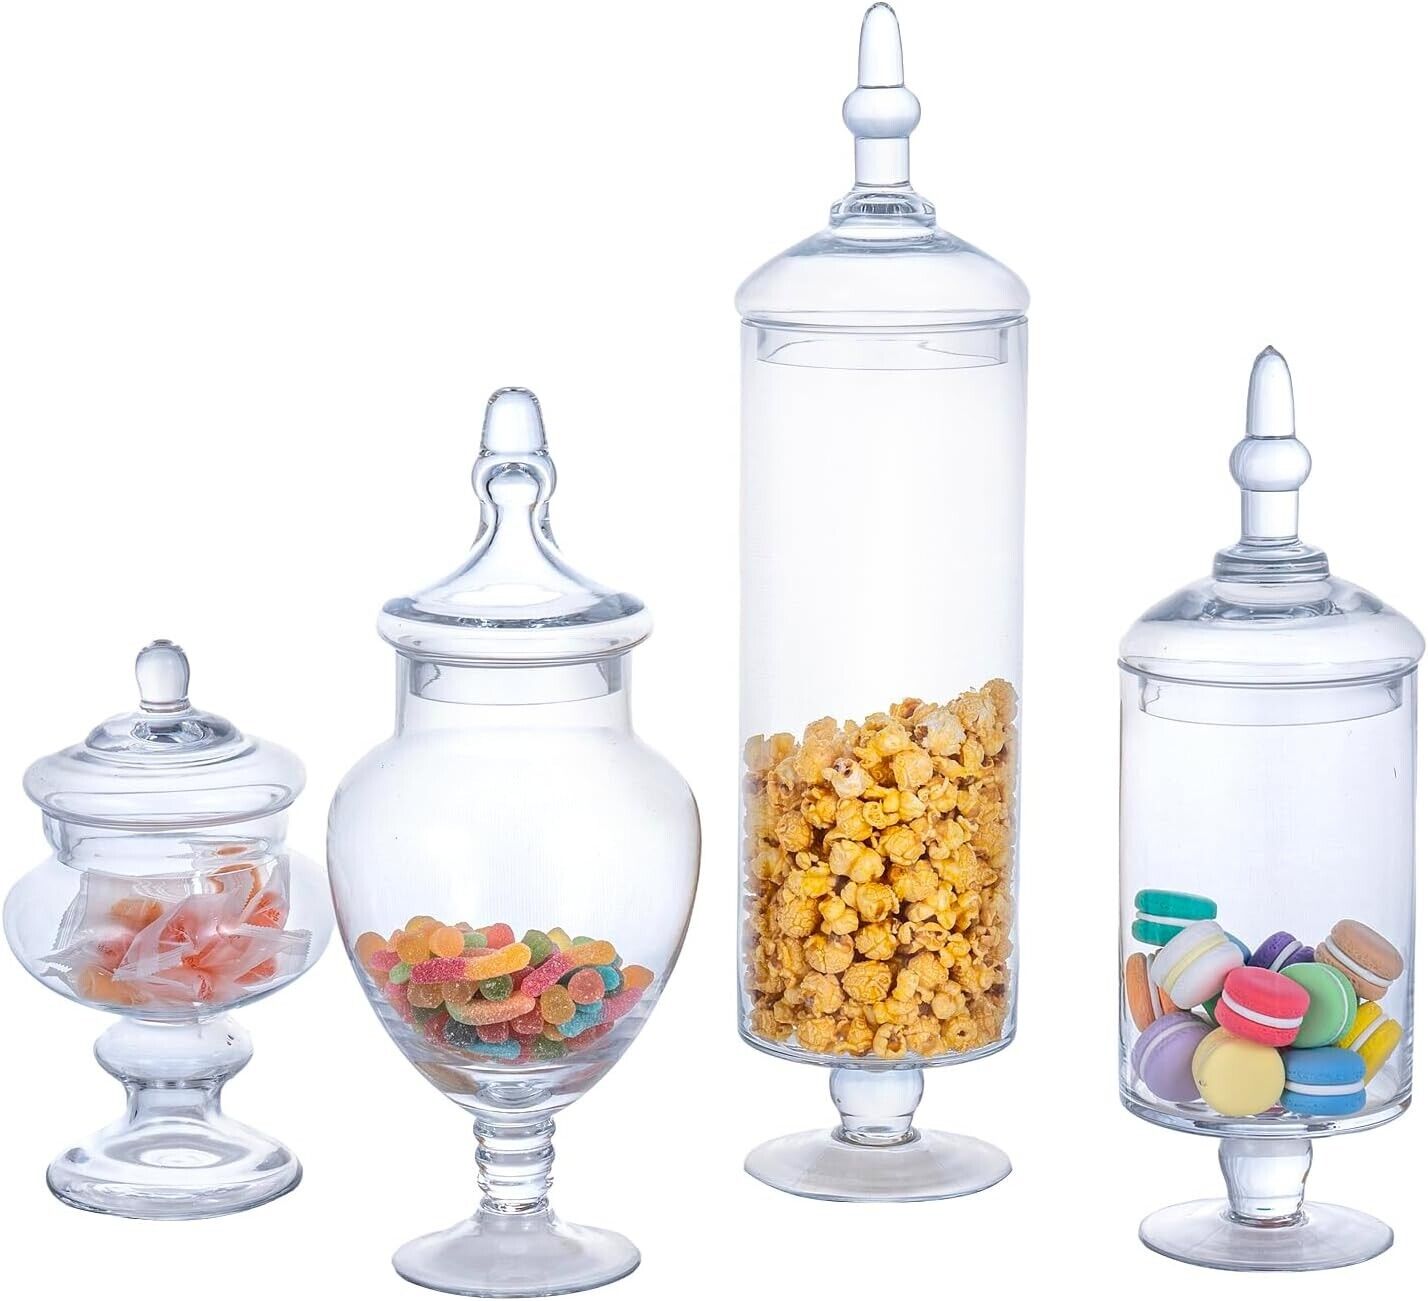 MyGift Set of 4 Large Classic Clear Glass Candy Buffet Apothecary Jars with Lids